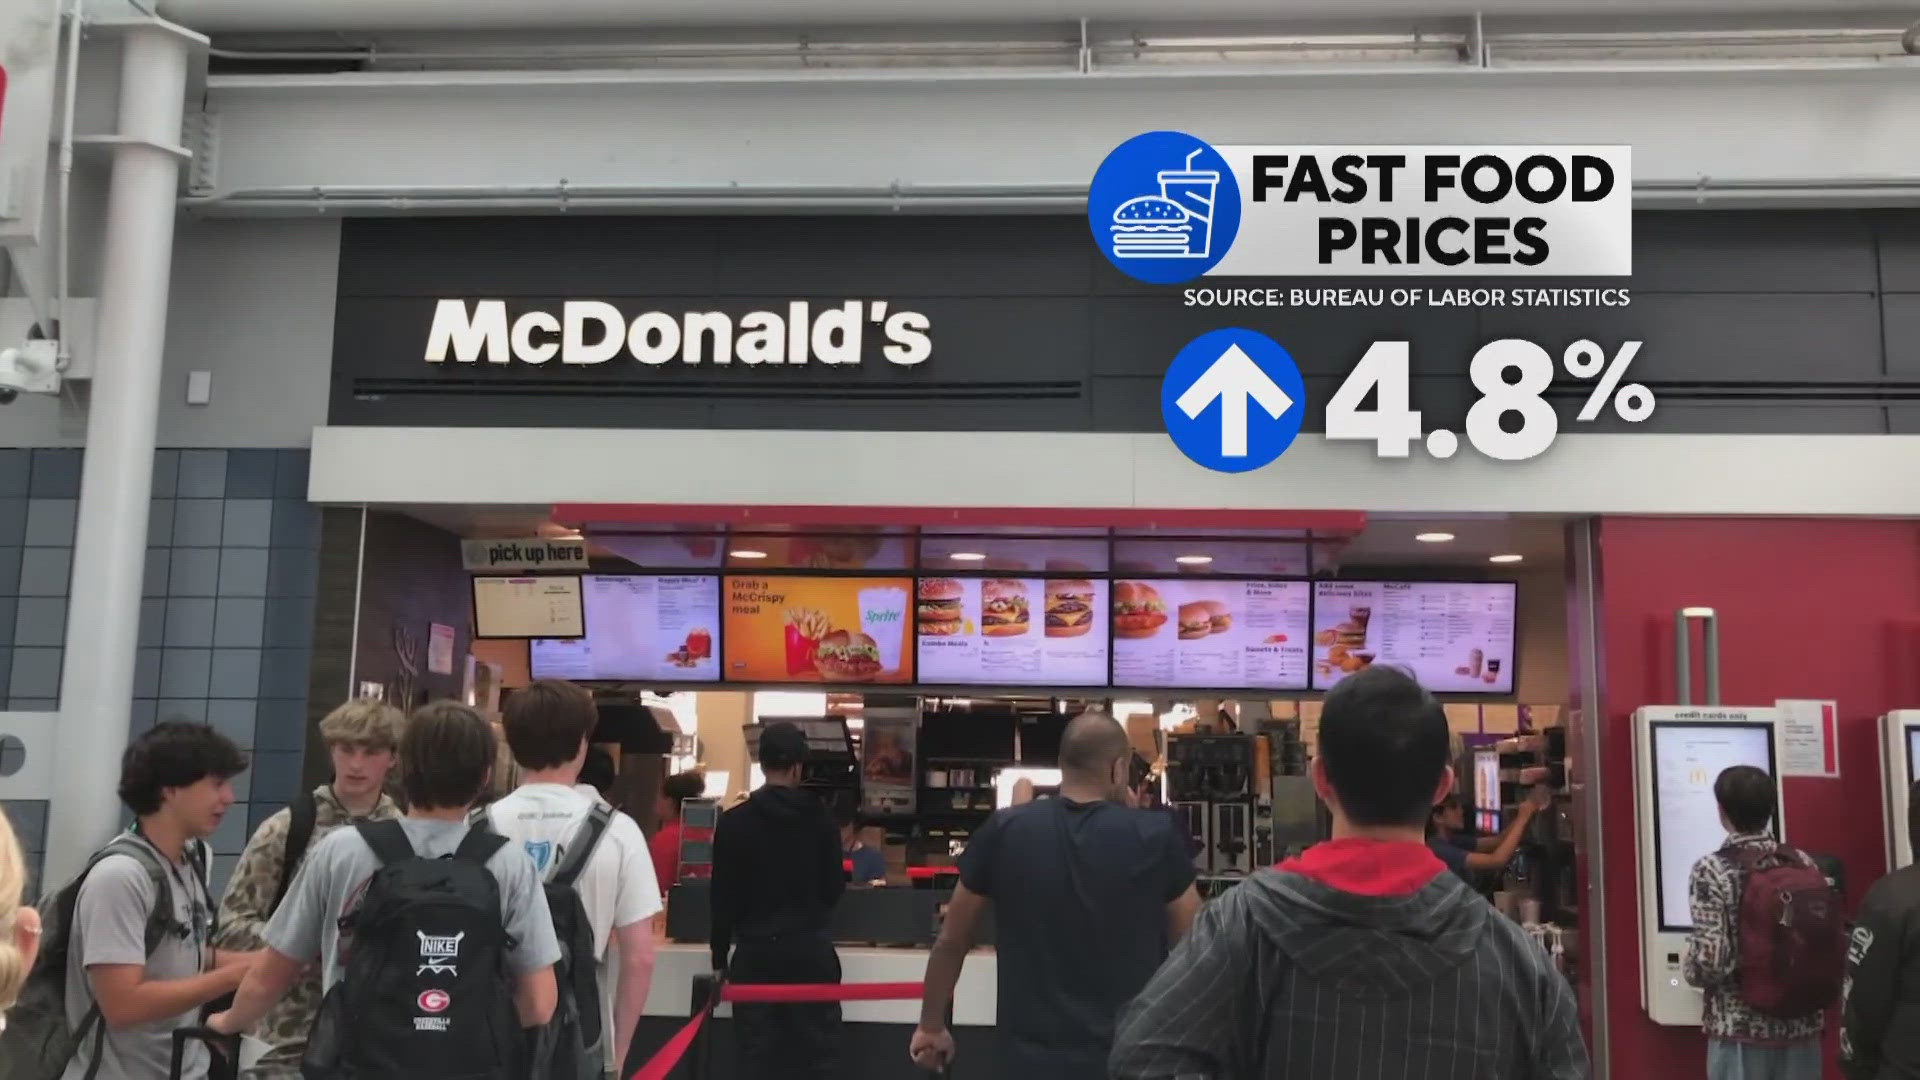 2 Wants To Know looked at the prices of popular fast-food items now vs. 10 years ago.